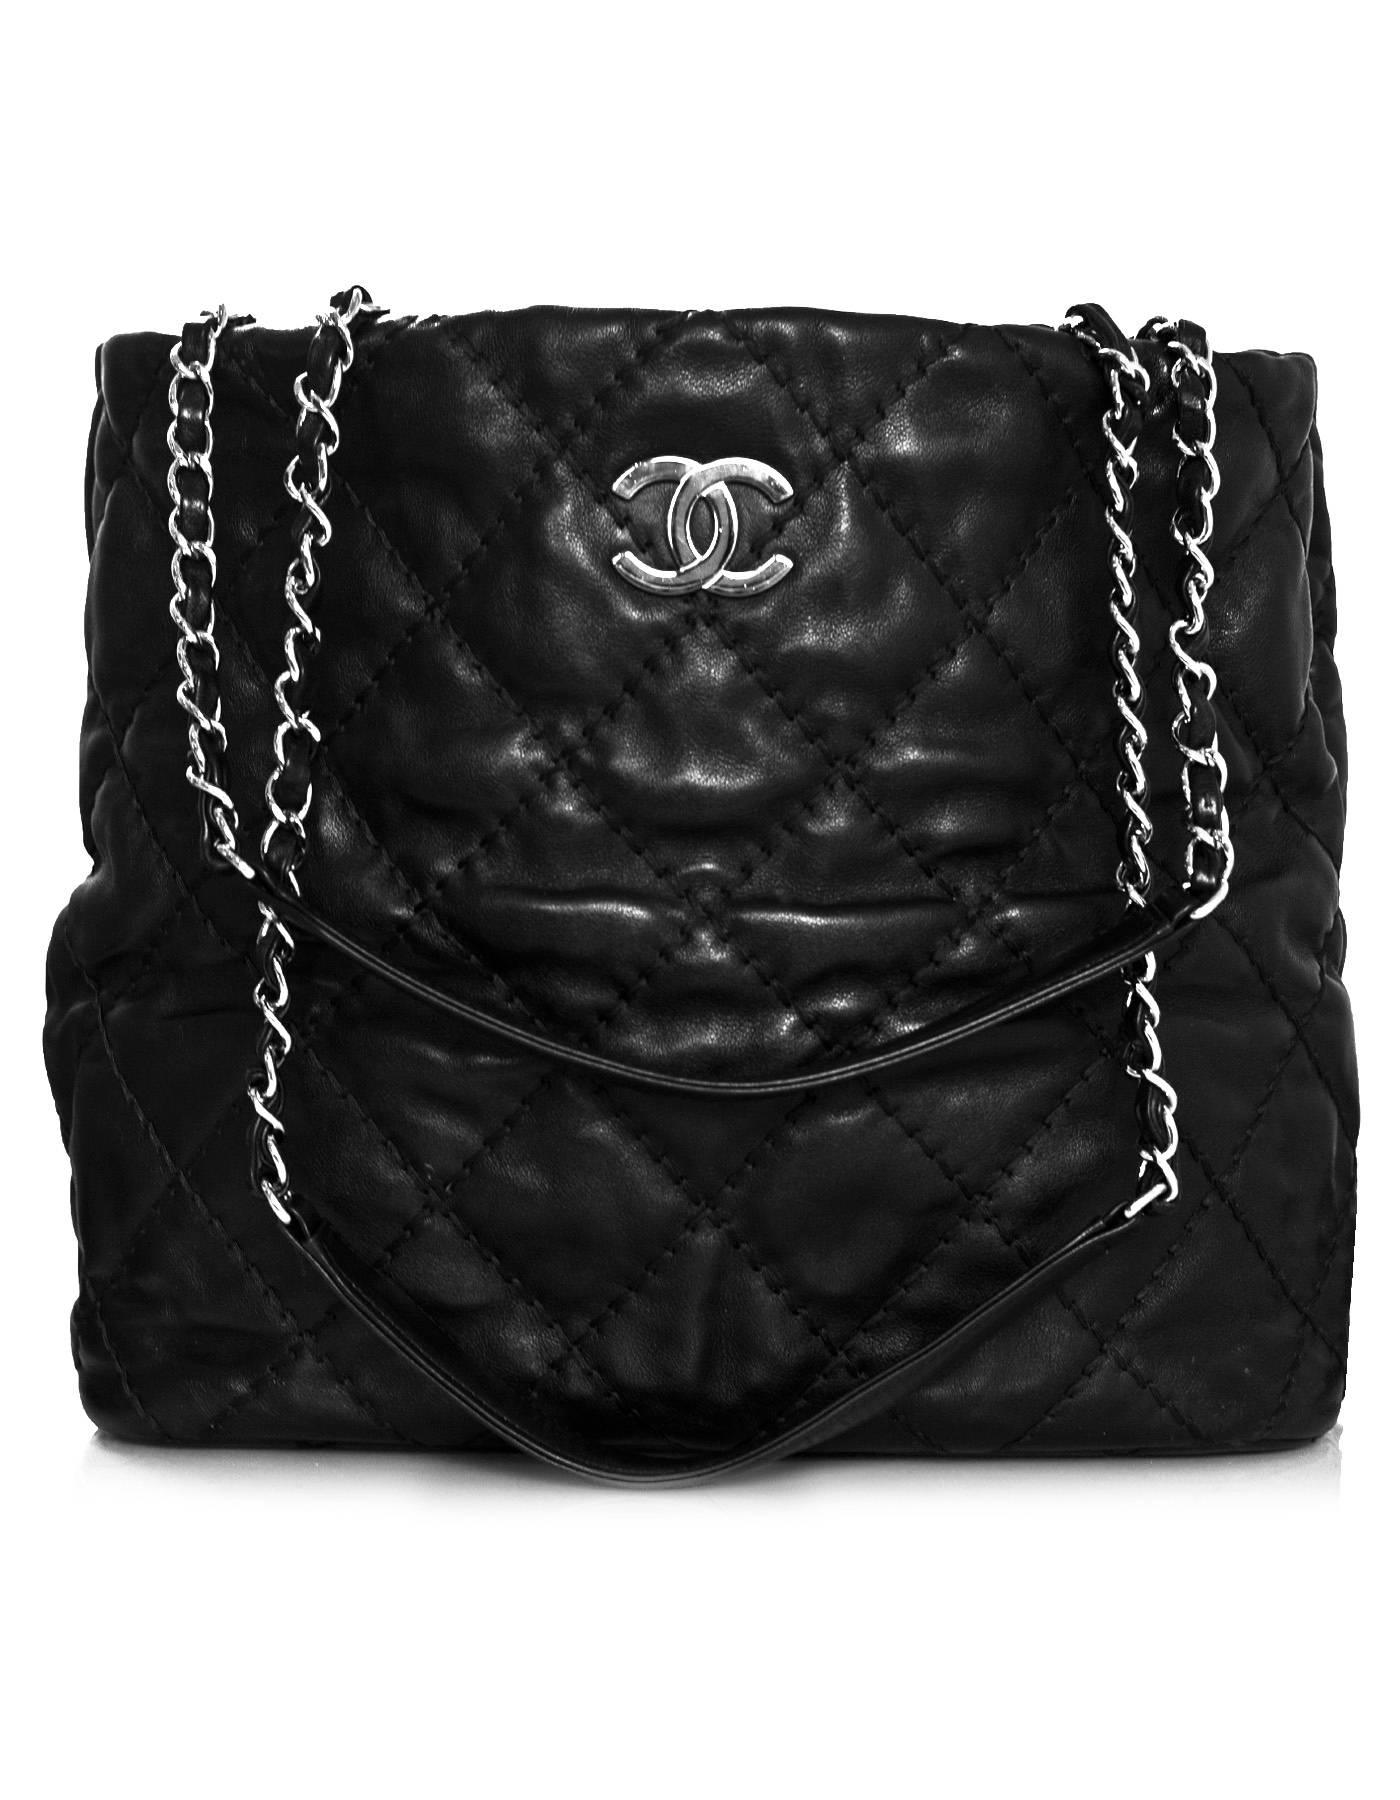 Chanel Black Quilted Ultimate Stitch Tote

Made In: France
Year of Production: 2012-2013
Color: Black
Hardware: Silvertone
Materials: Leather, metal
Lining: Black textile
Closure/opening: Open top
Exterior Pockets: None
Interior Pockets: One wall